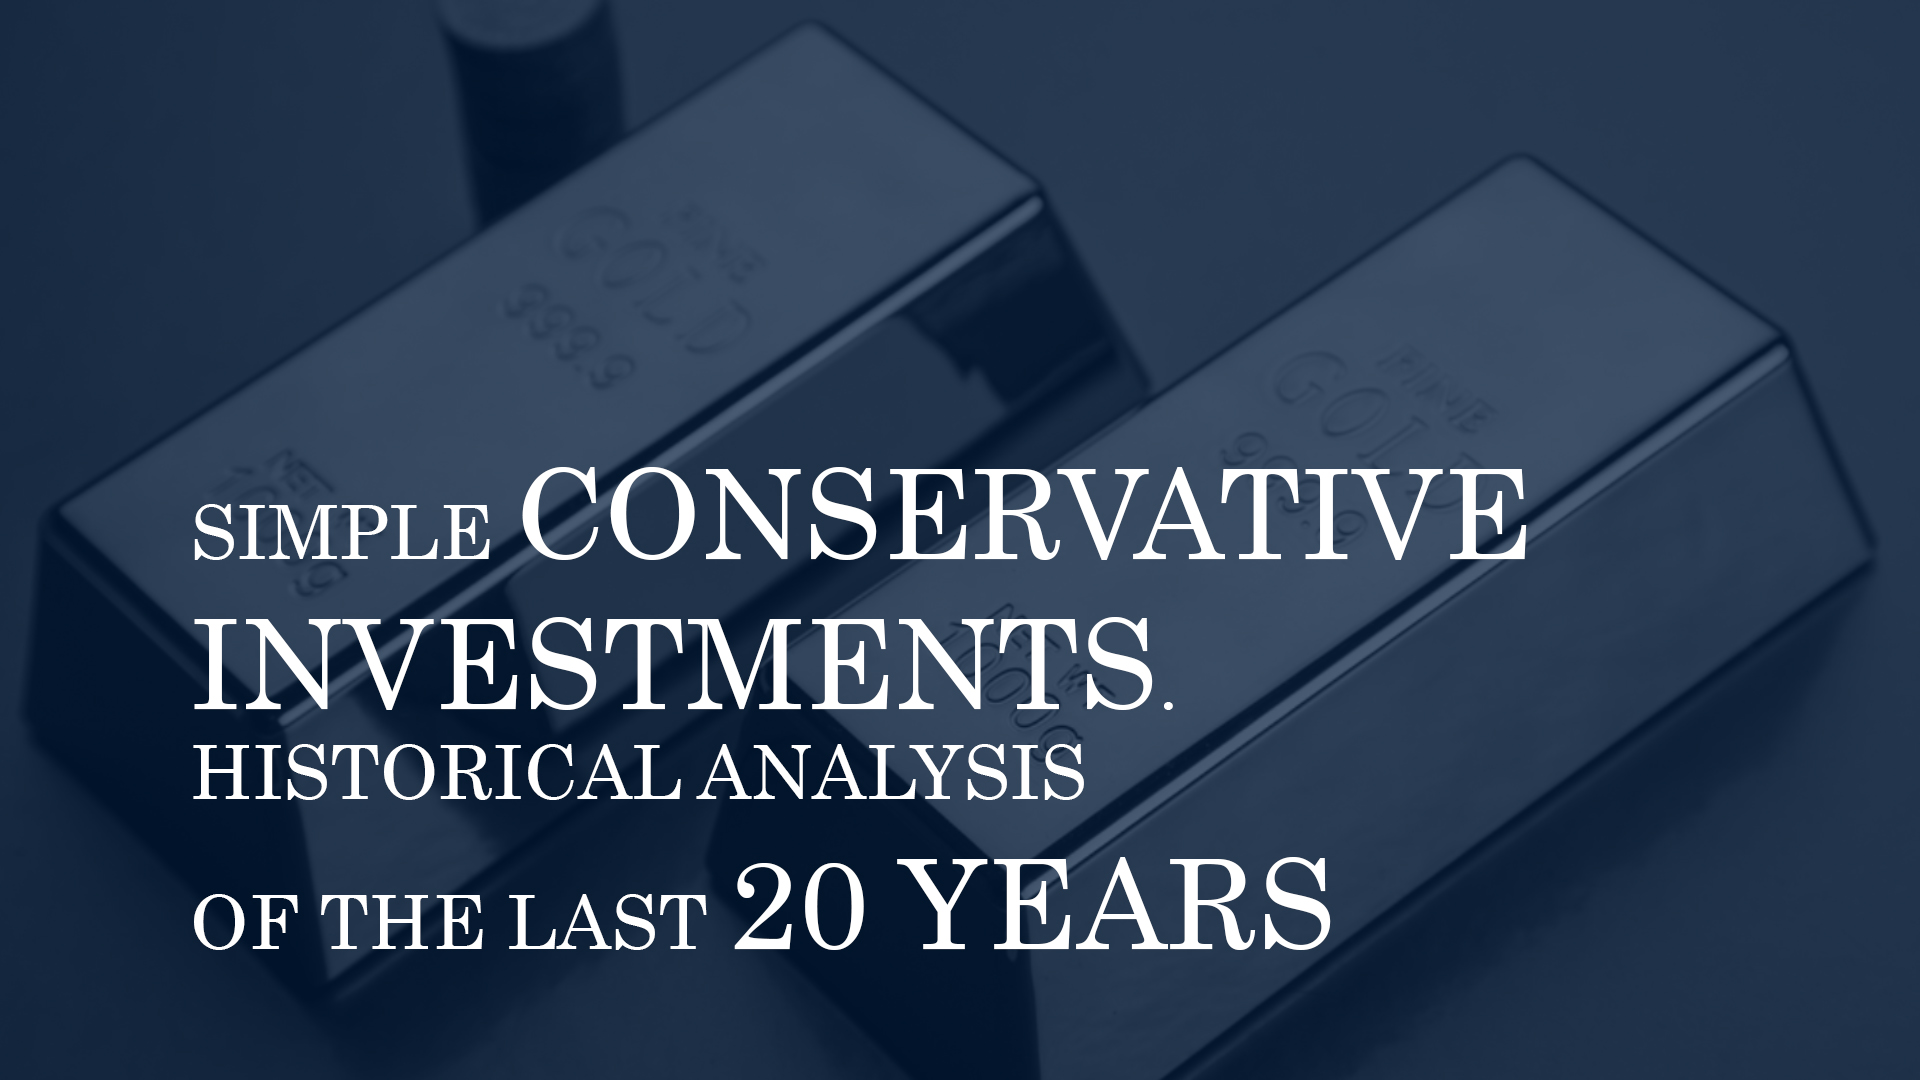 SIMPLE CONSERVATIVE INVESTMENTS. HISTORICAL ANALYSIS OF THE LAST 20 YEARS